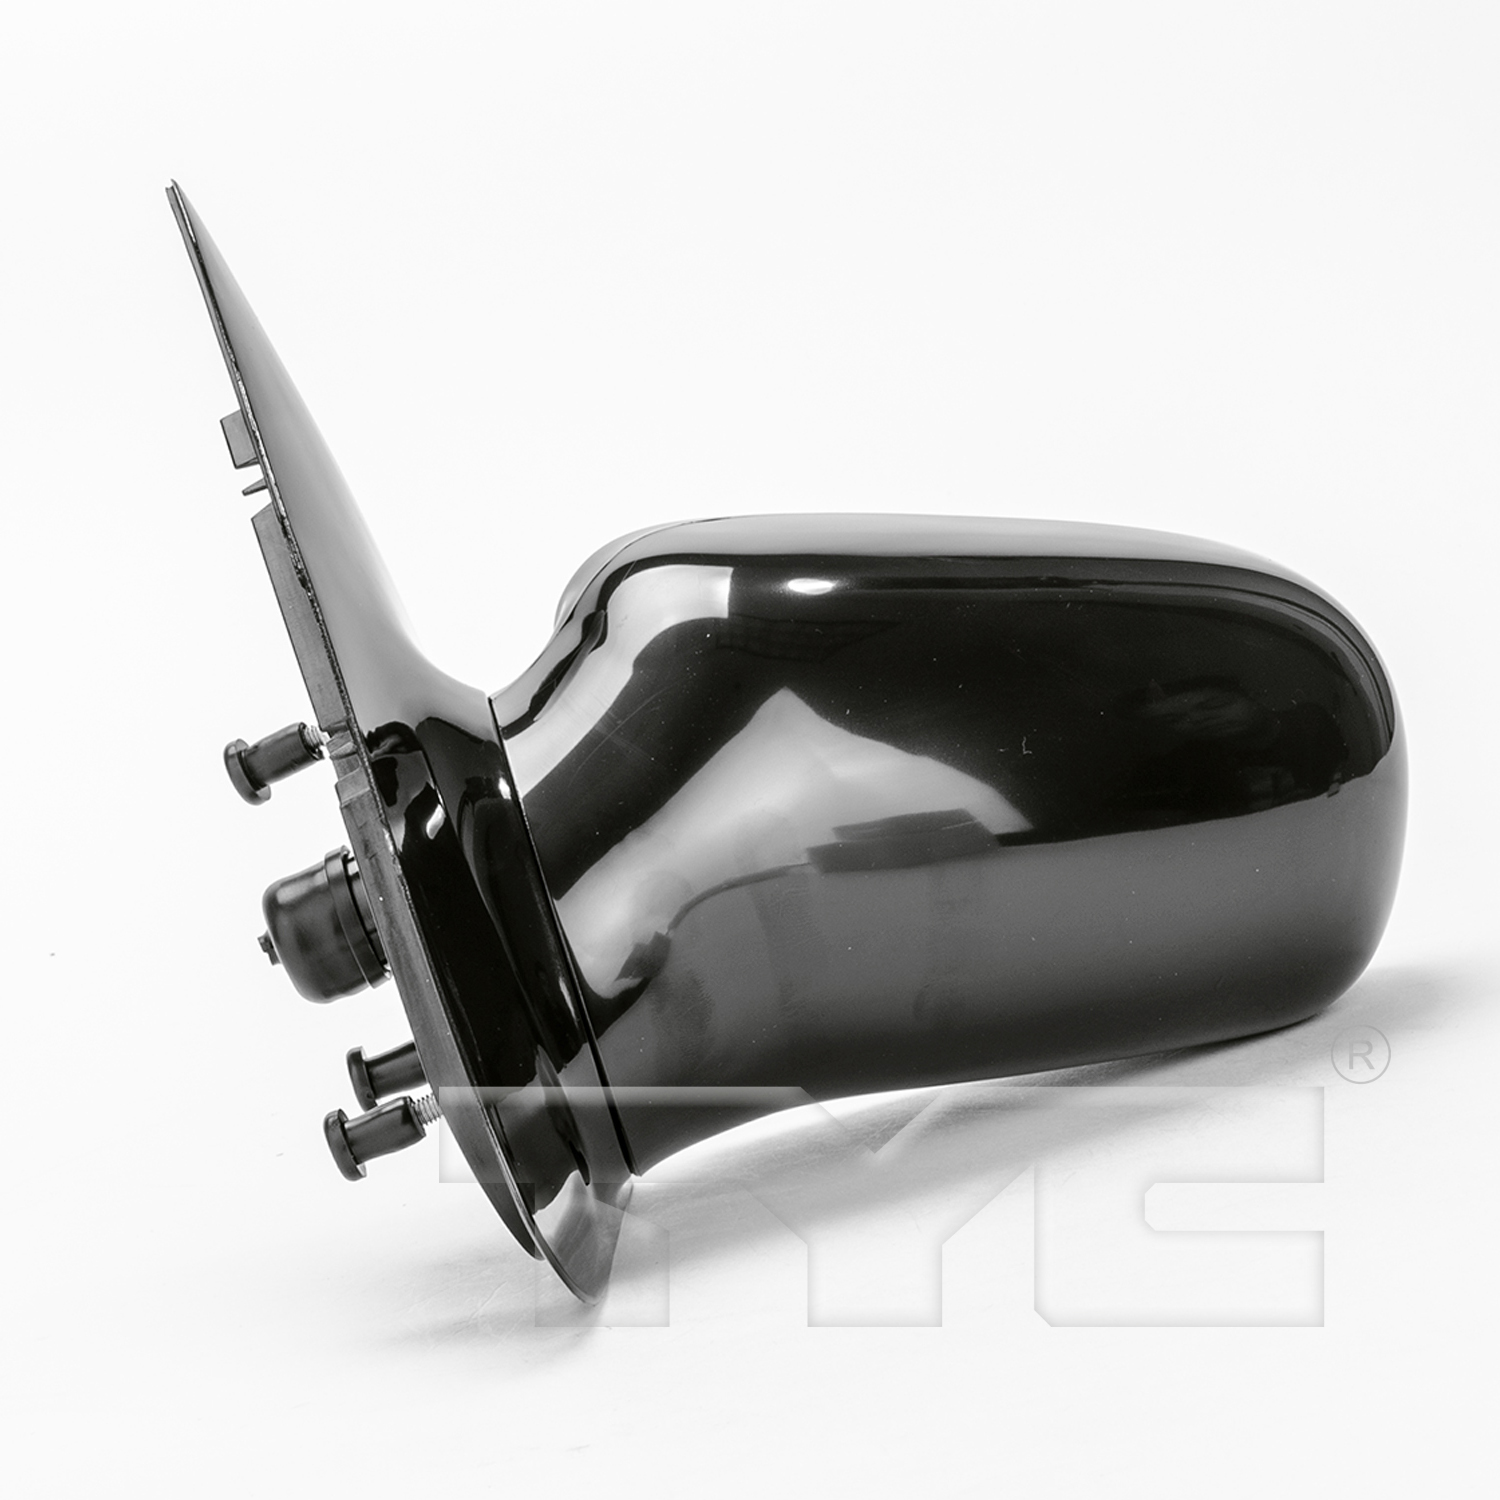 Aftermarket MIRRORS for PONTIAC - SUNFIRE, SUNFIRE,95-05,LT Mirror outside rear view